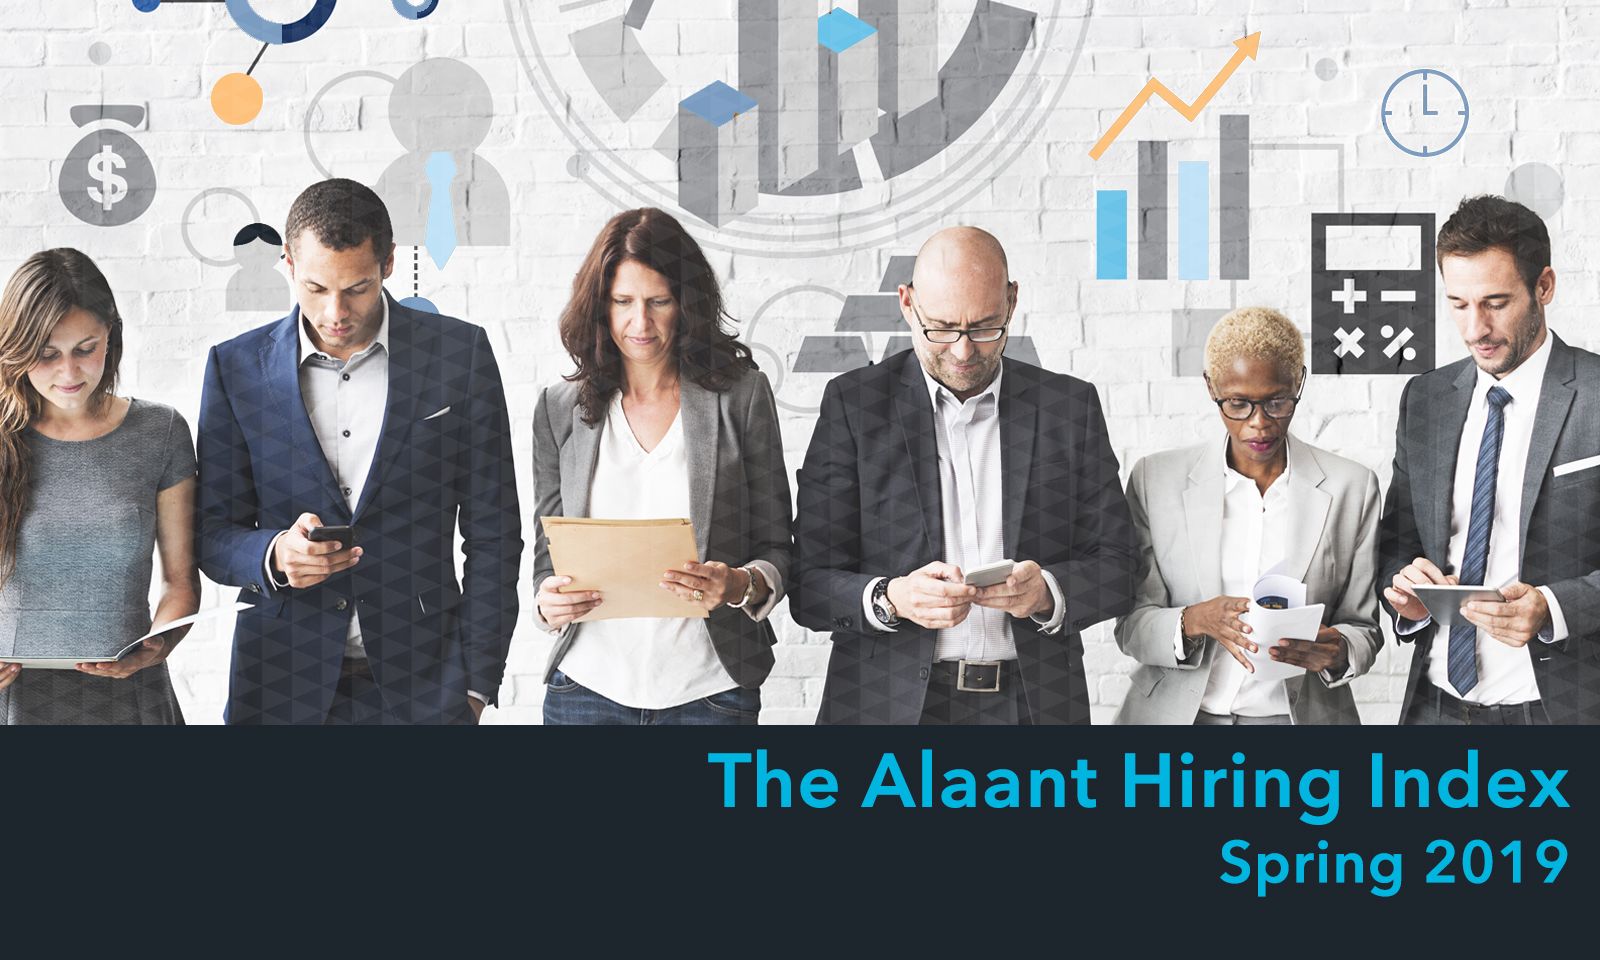 Press Release Alaant Hiring Index  Spring 2019 After Strong Start Hiring to Slow Amid Recruiting Challenges According to Capital Region Employers 